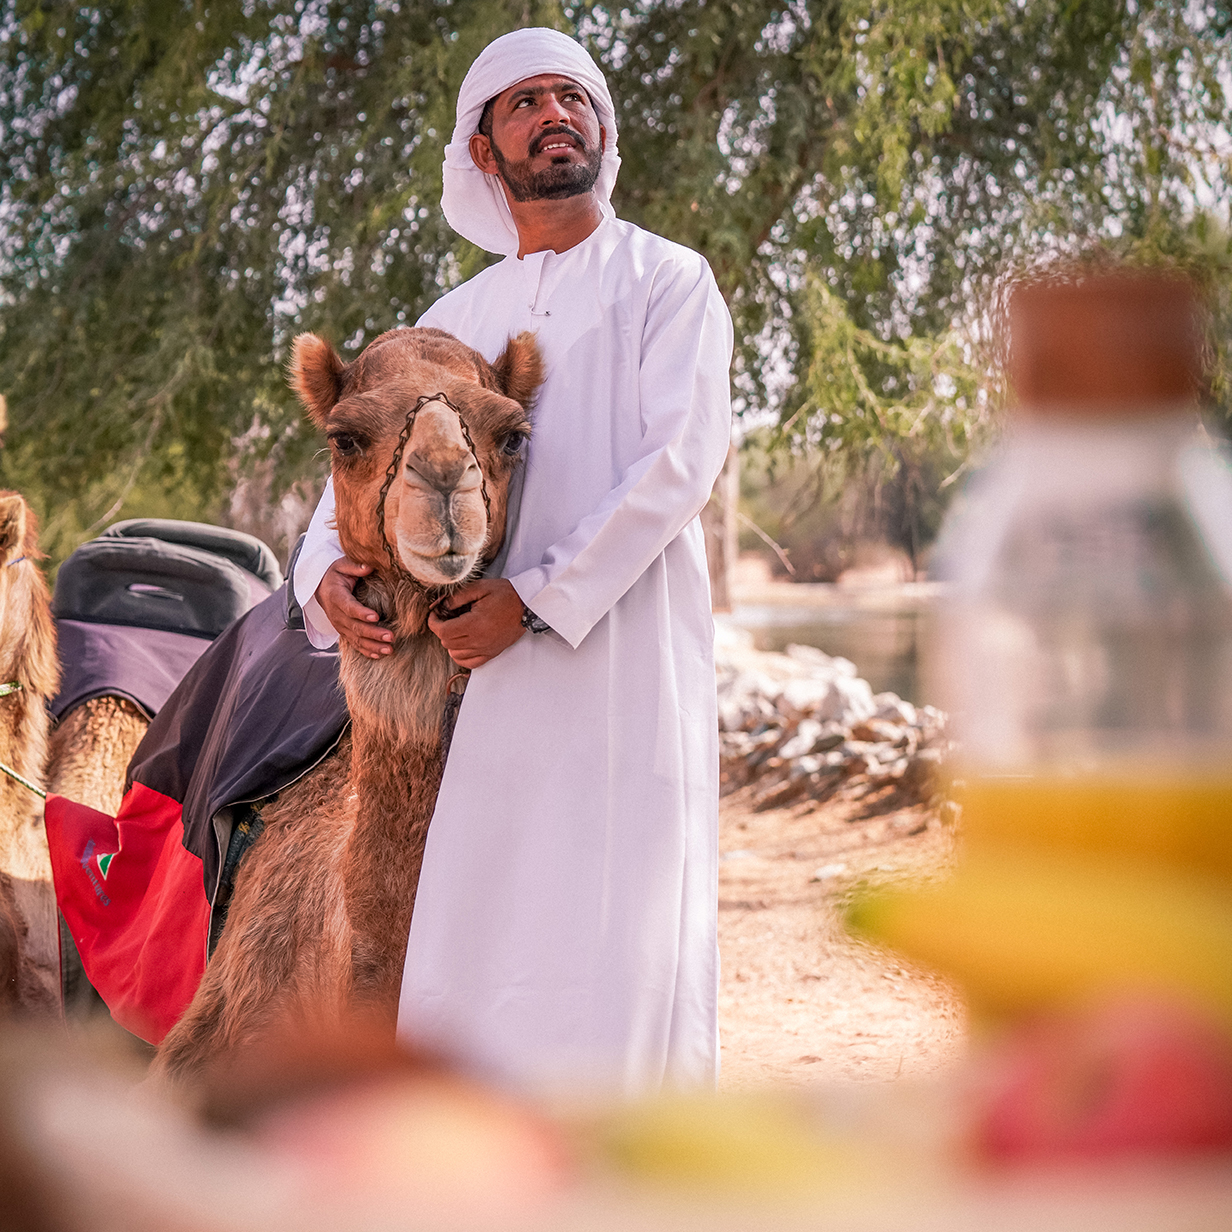 Camel Ride in Dubai - Private Vehicle, , large